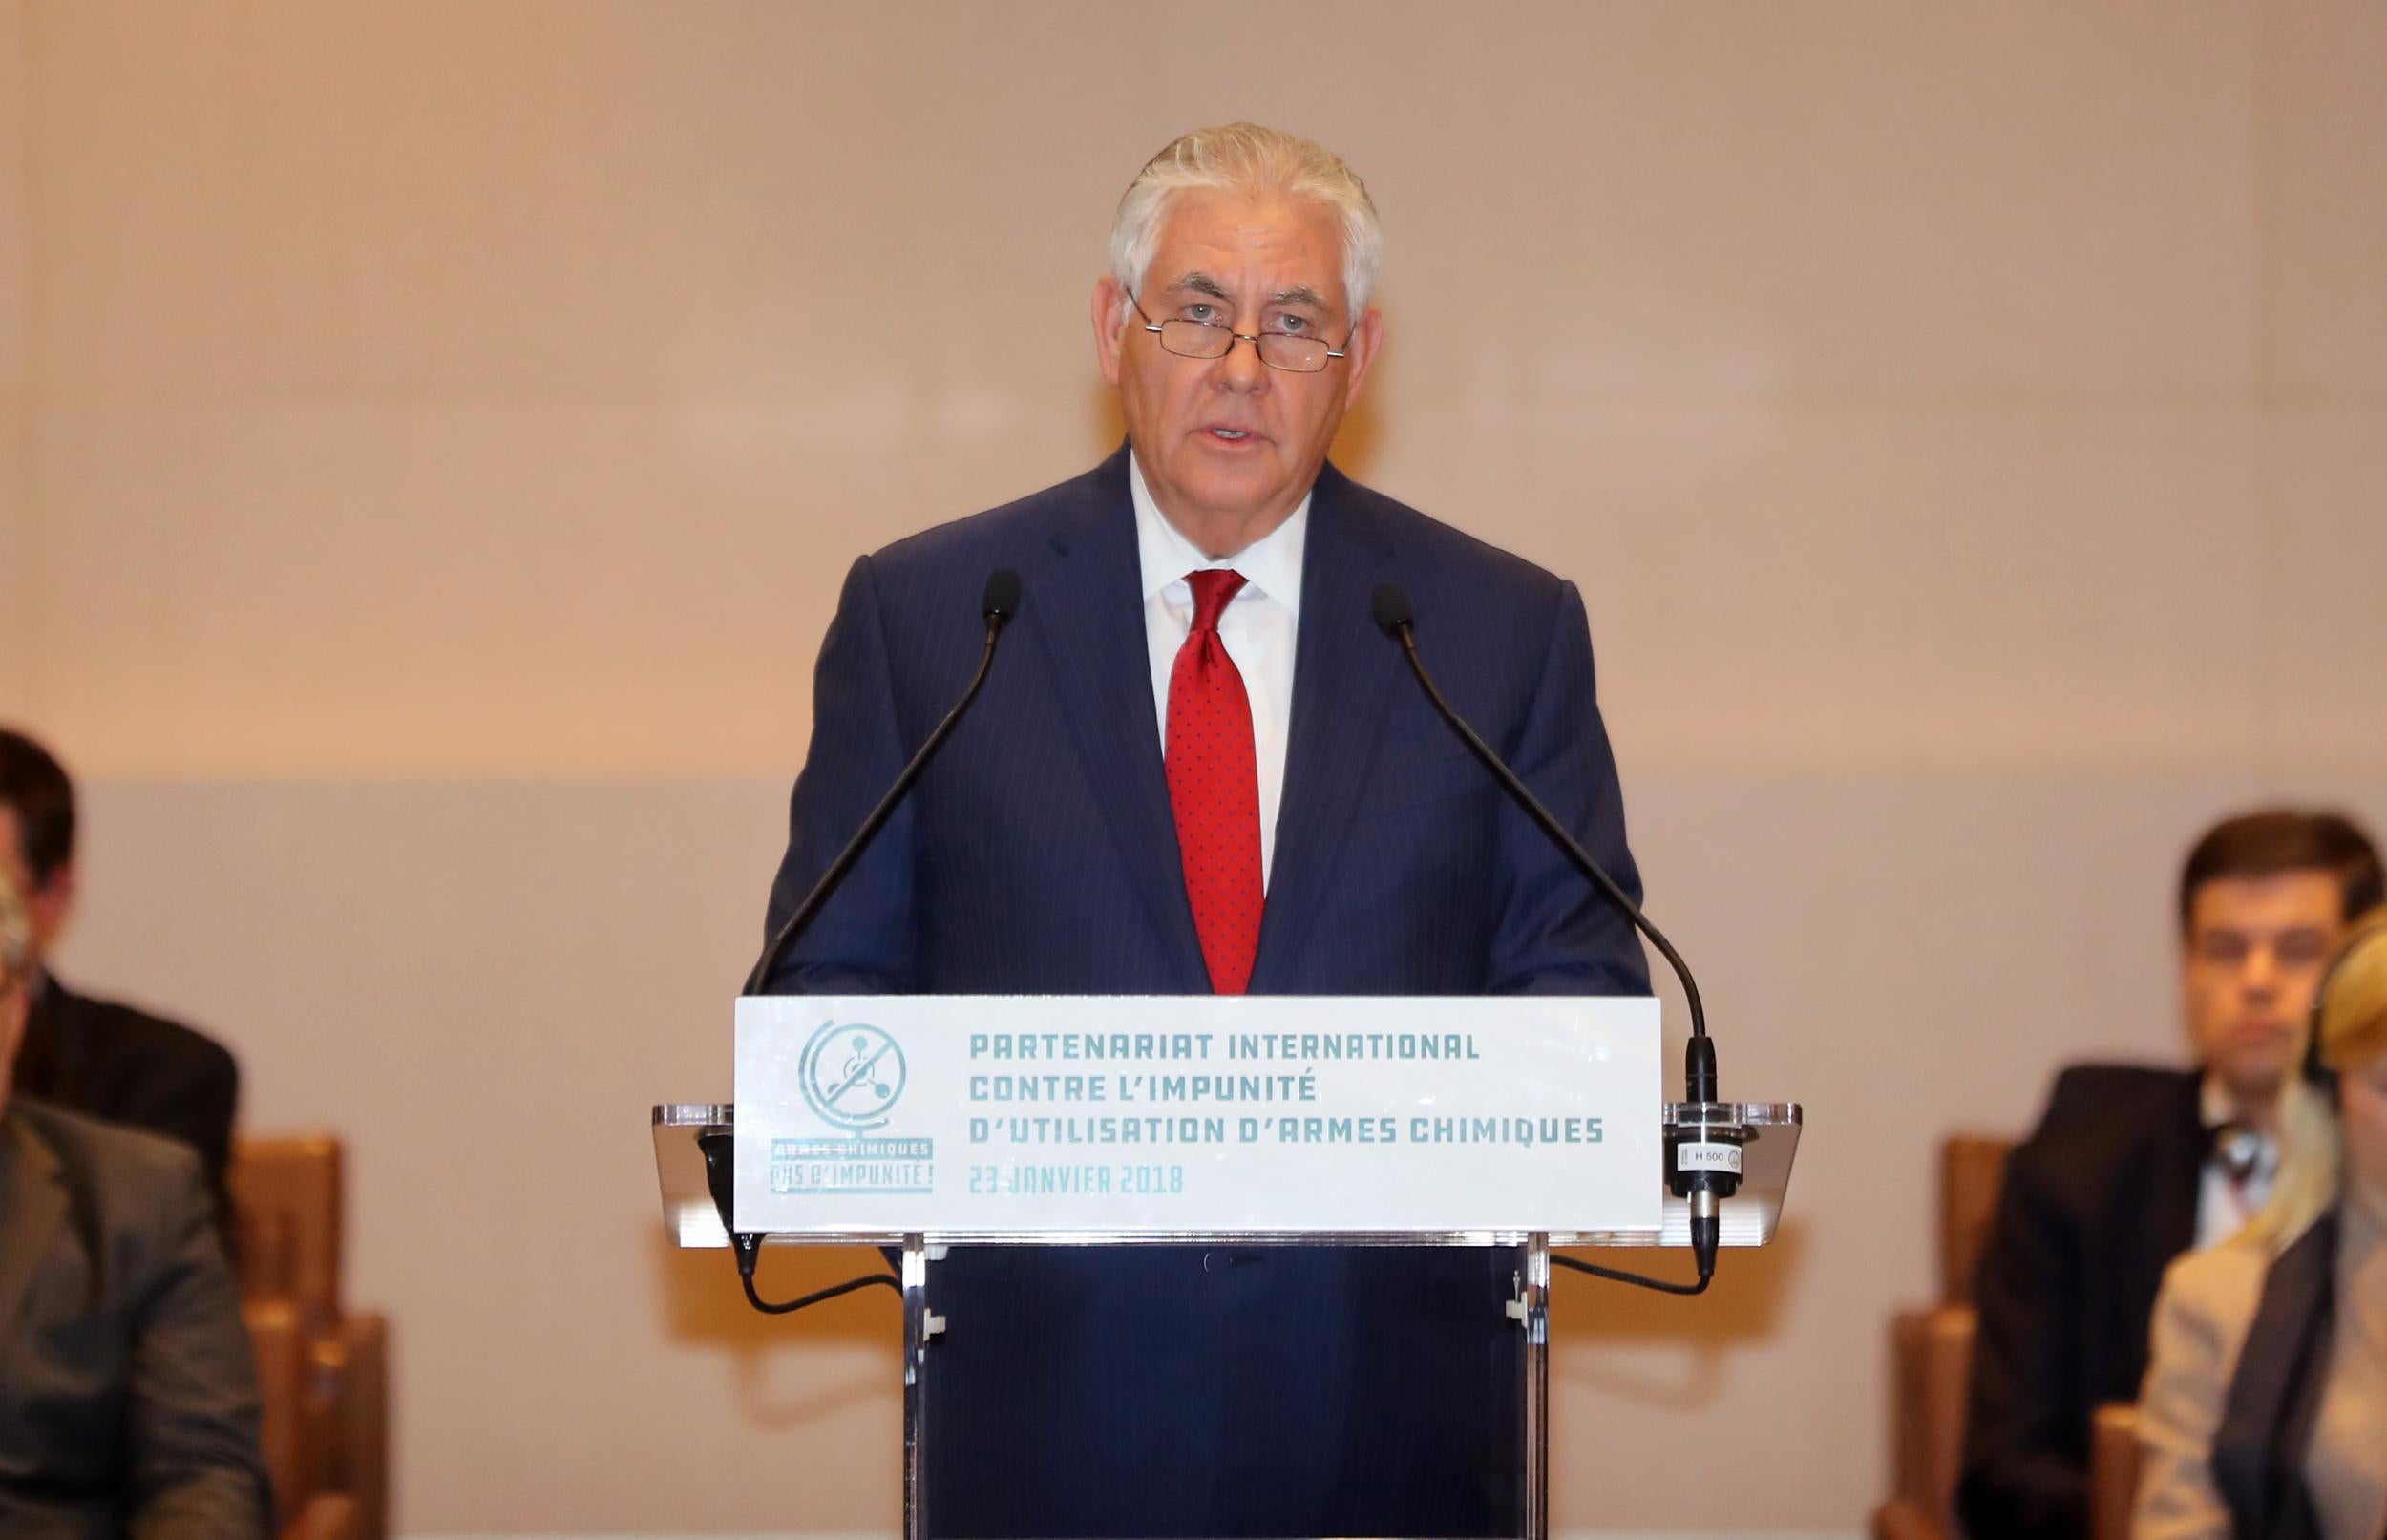 Rex Tillerson speaks during a meeting of diplomats pushing for sanctions and criminal charges against the perpetrators of chemical attacks in Syria